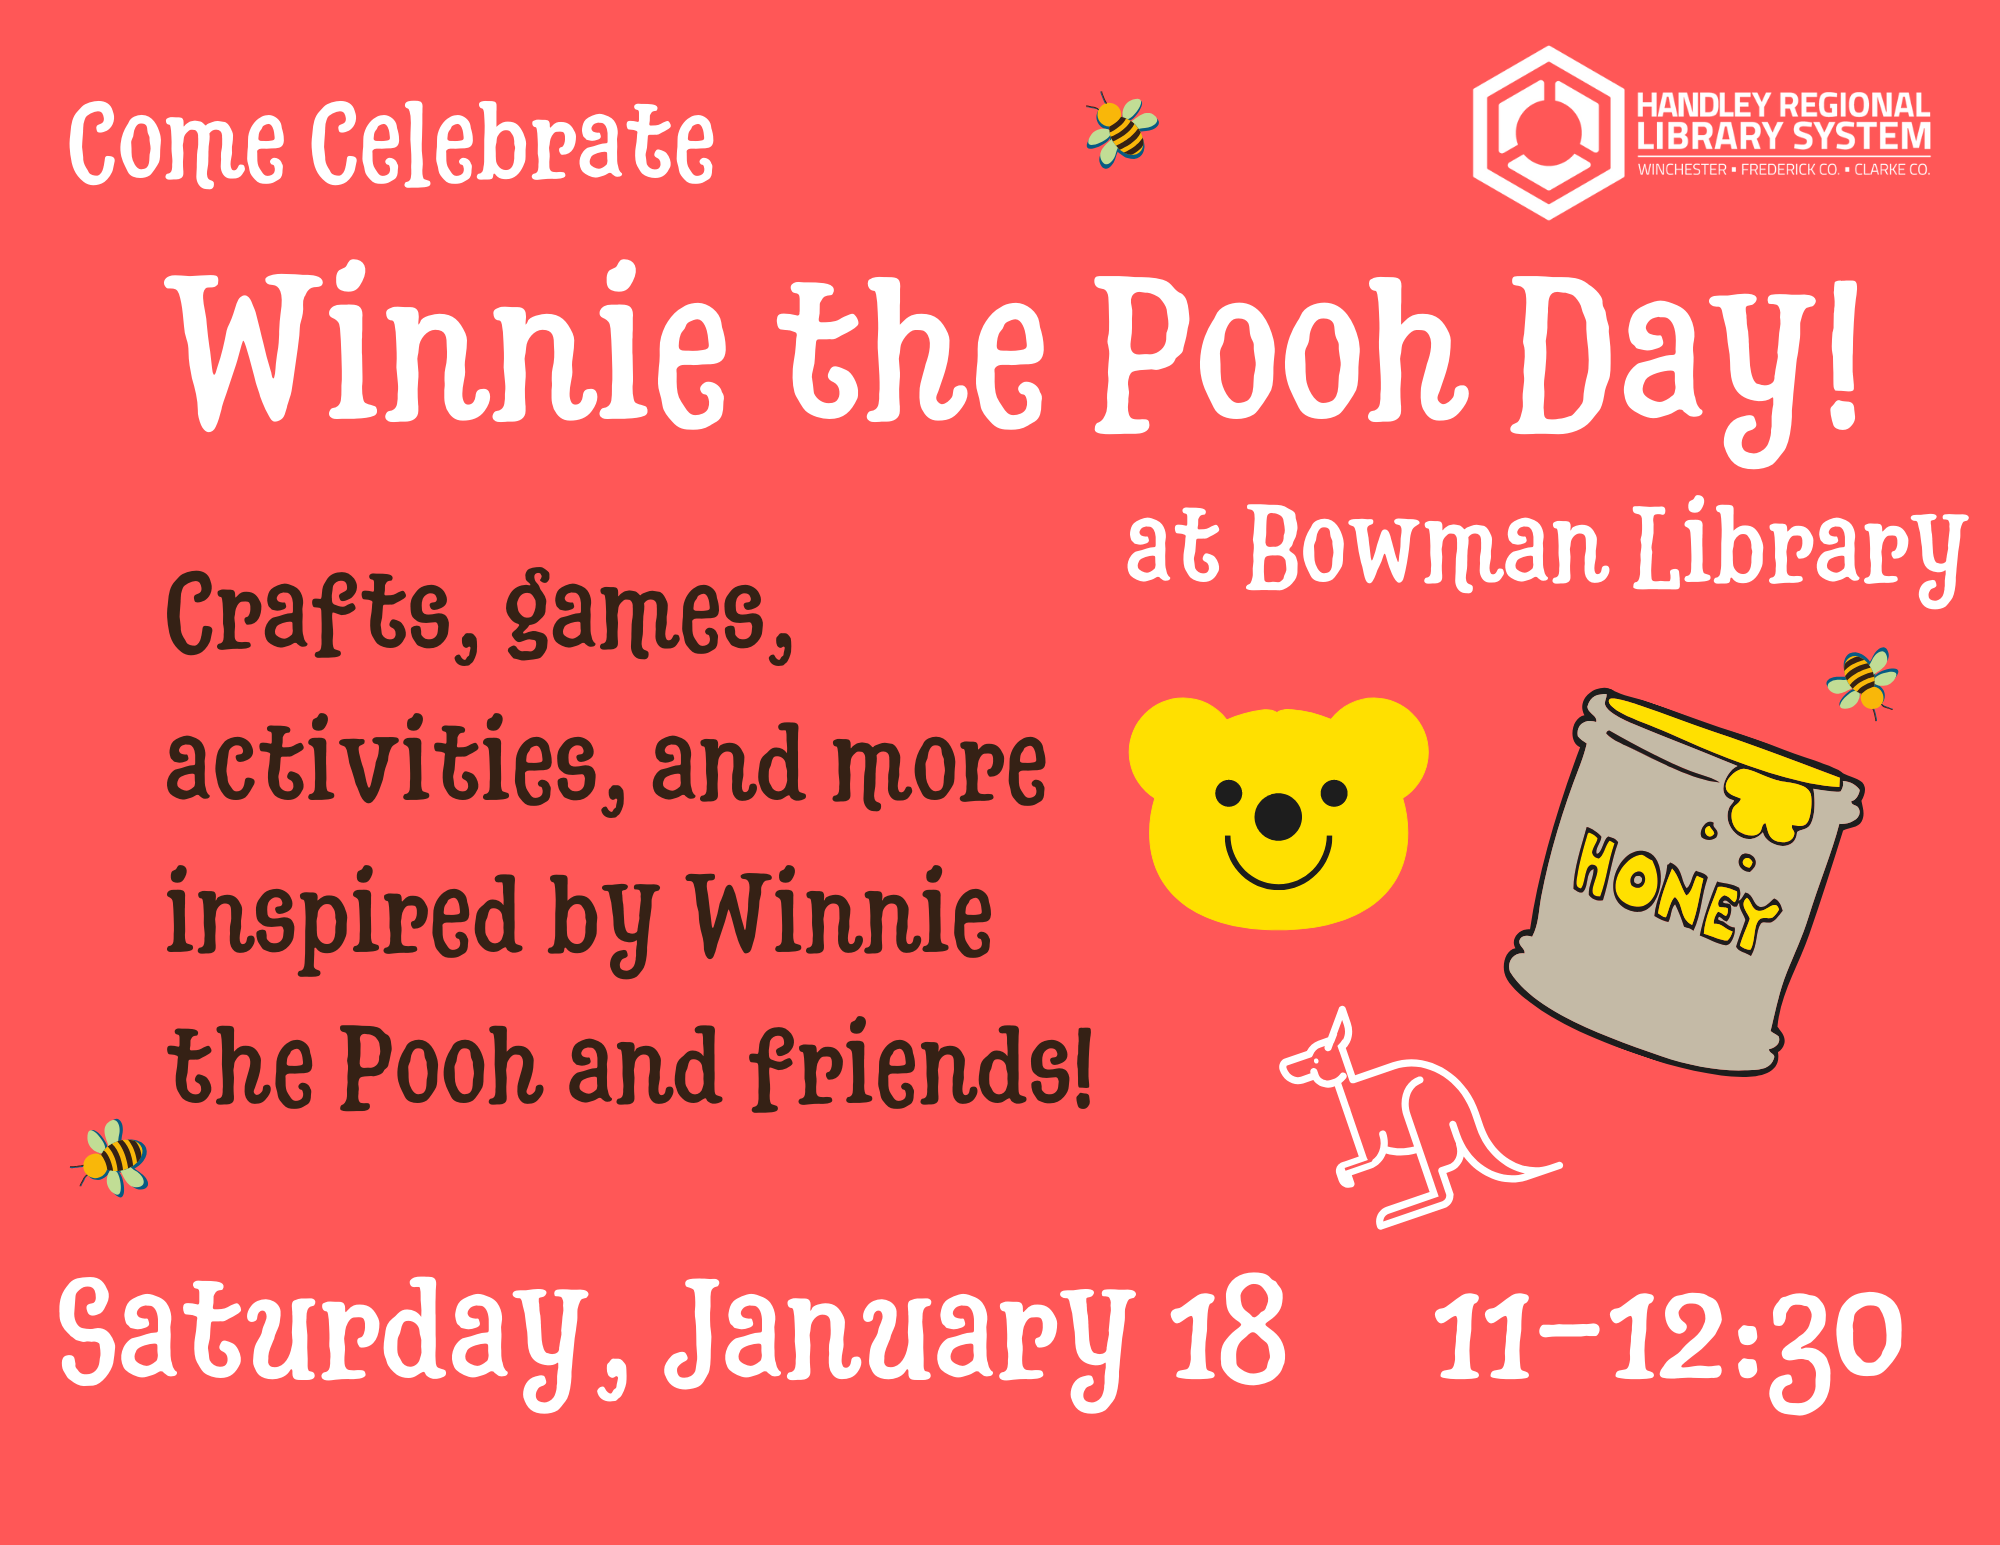 Winnie the Pooh Day at Bowman Library!